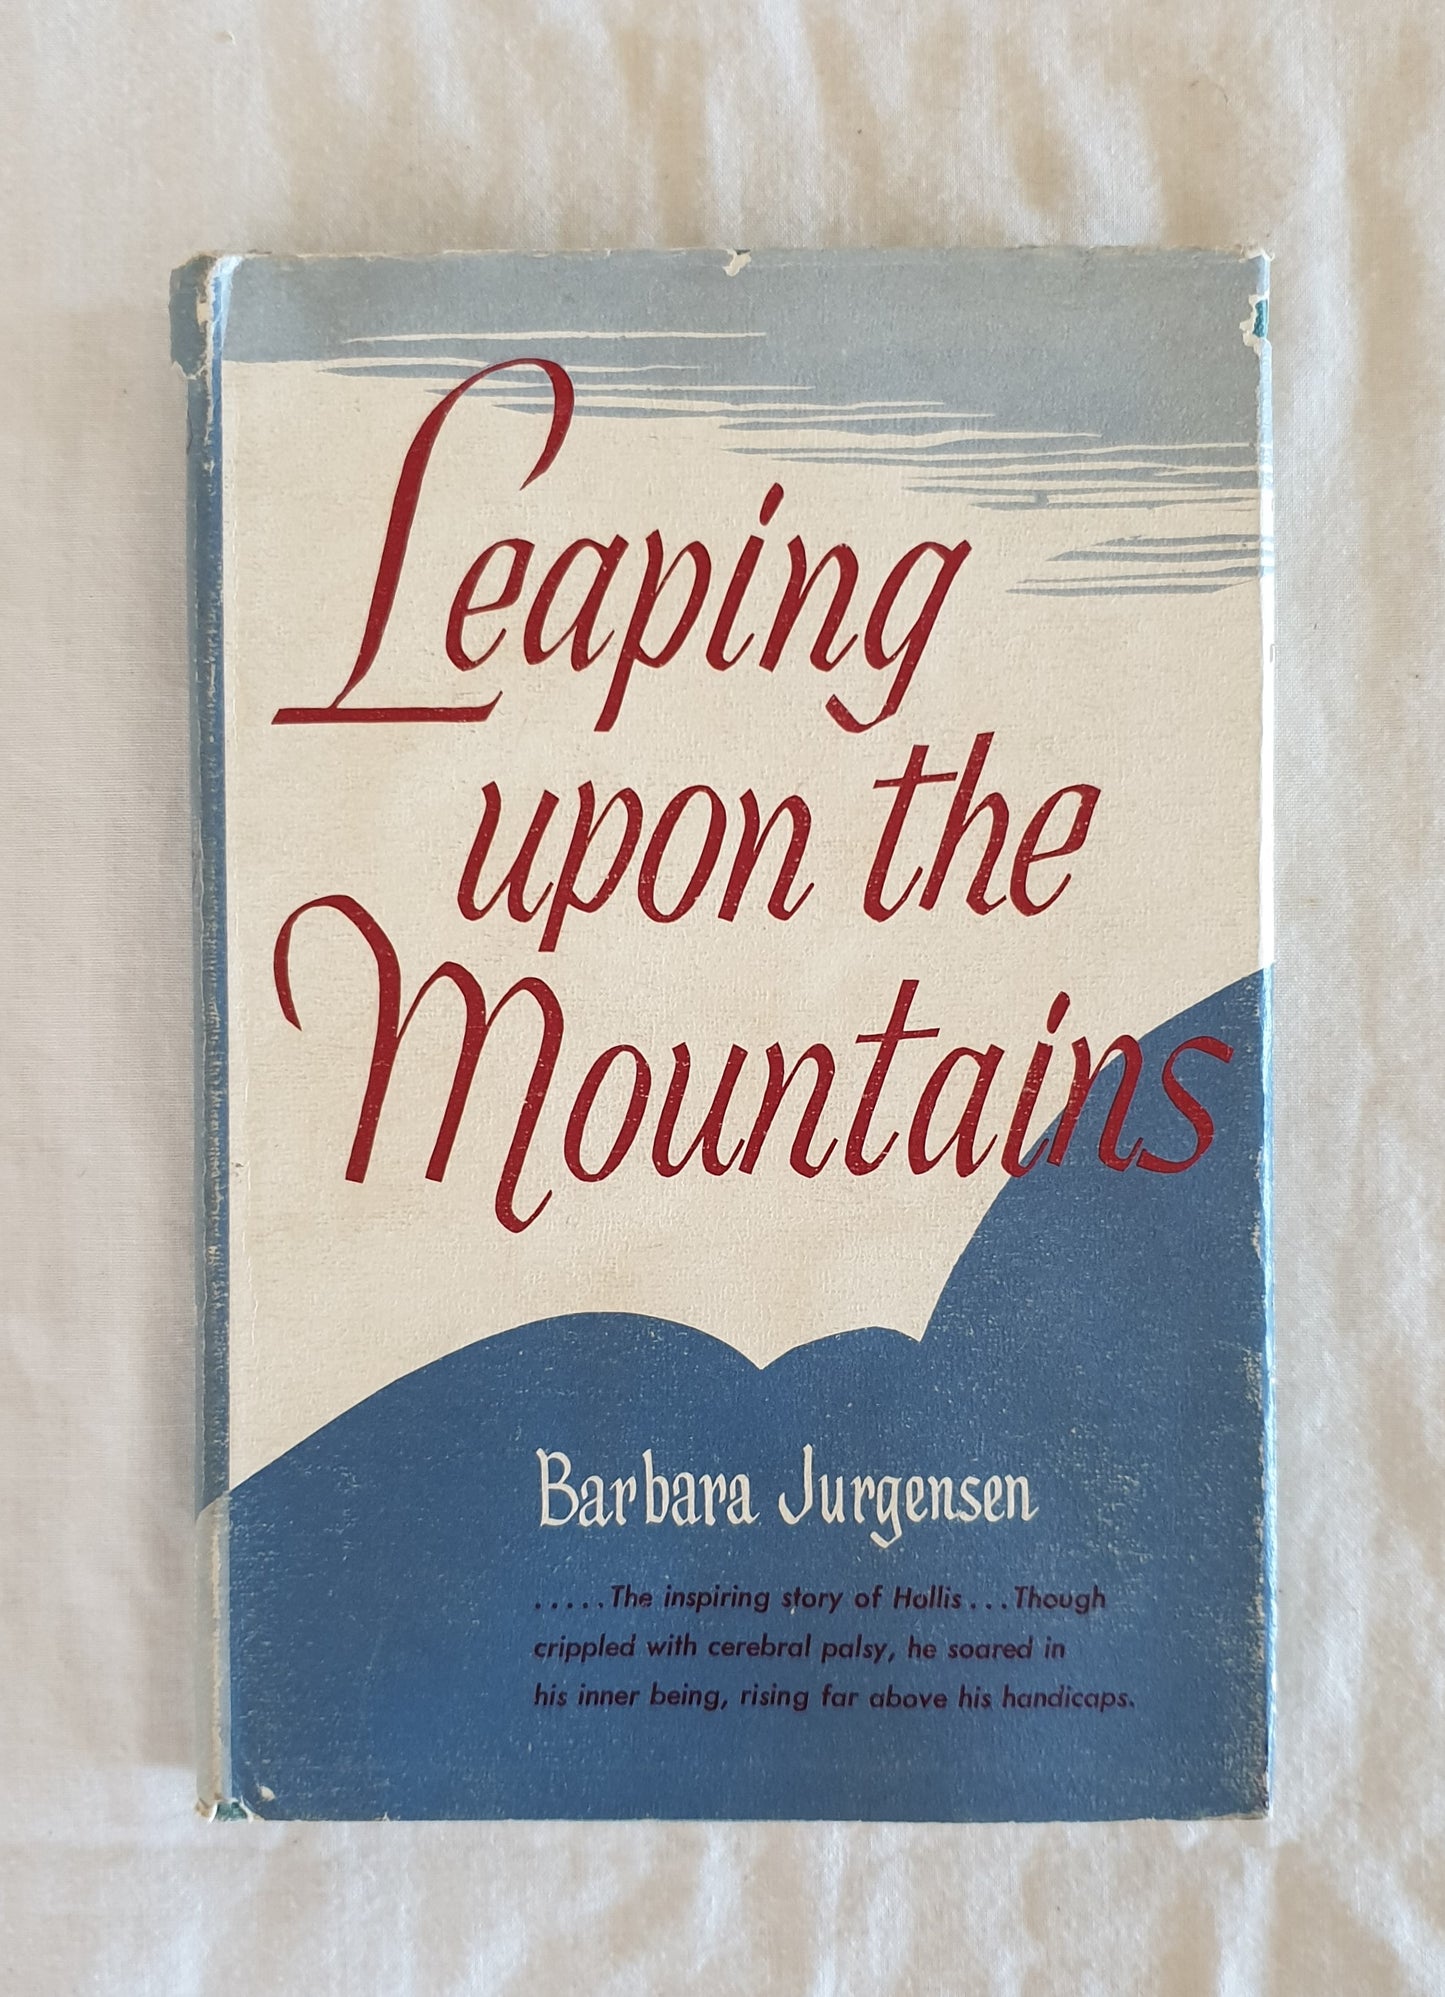 Leaping Upon The Mountains by Barbara Jurgensen